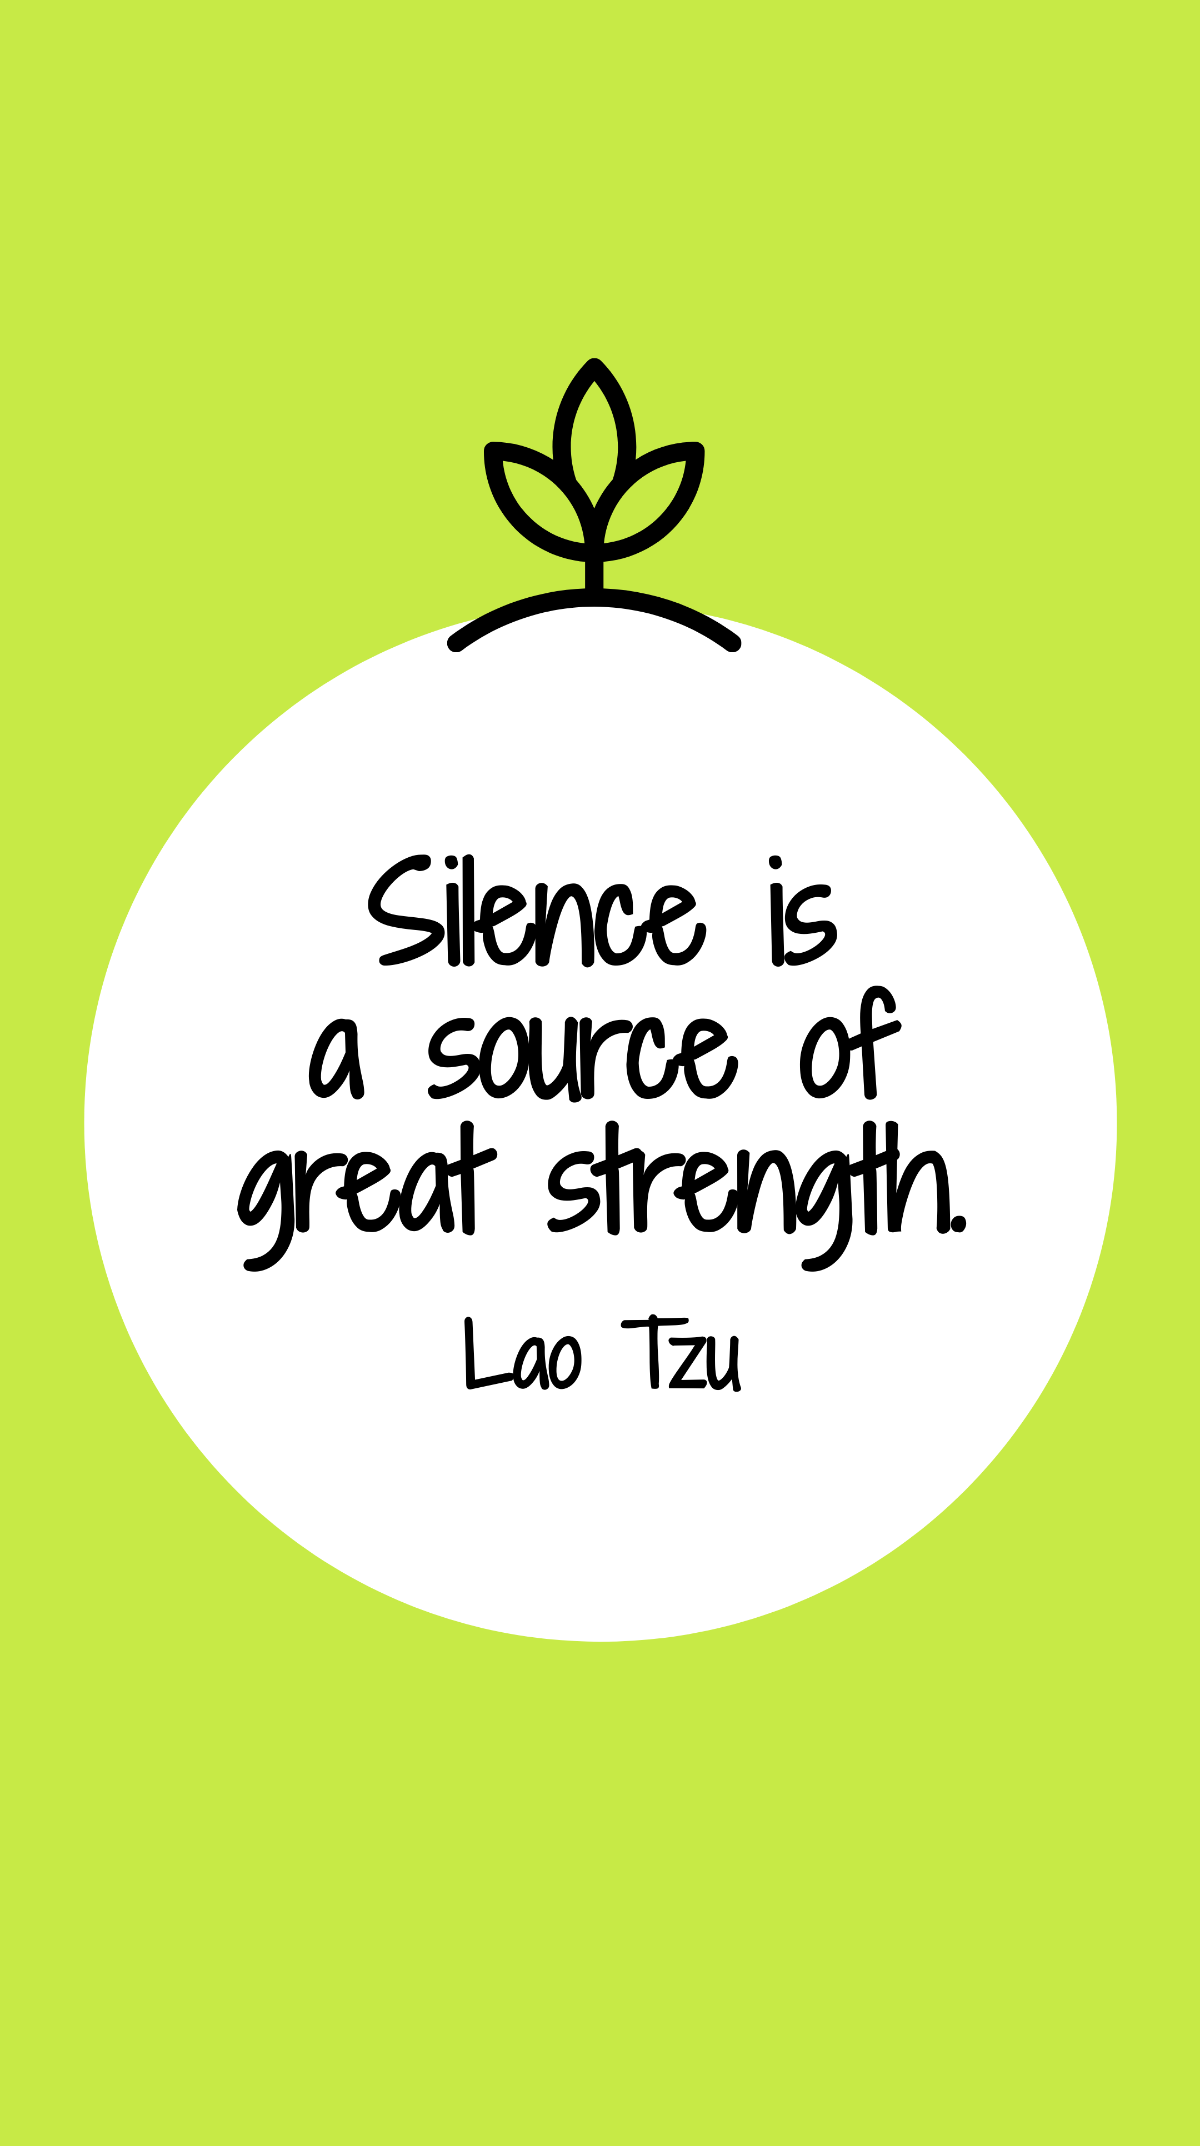 Lao Tzu - Silence is a source of great strength. Template